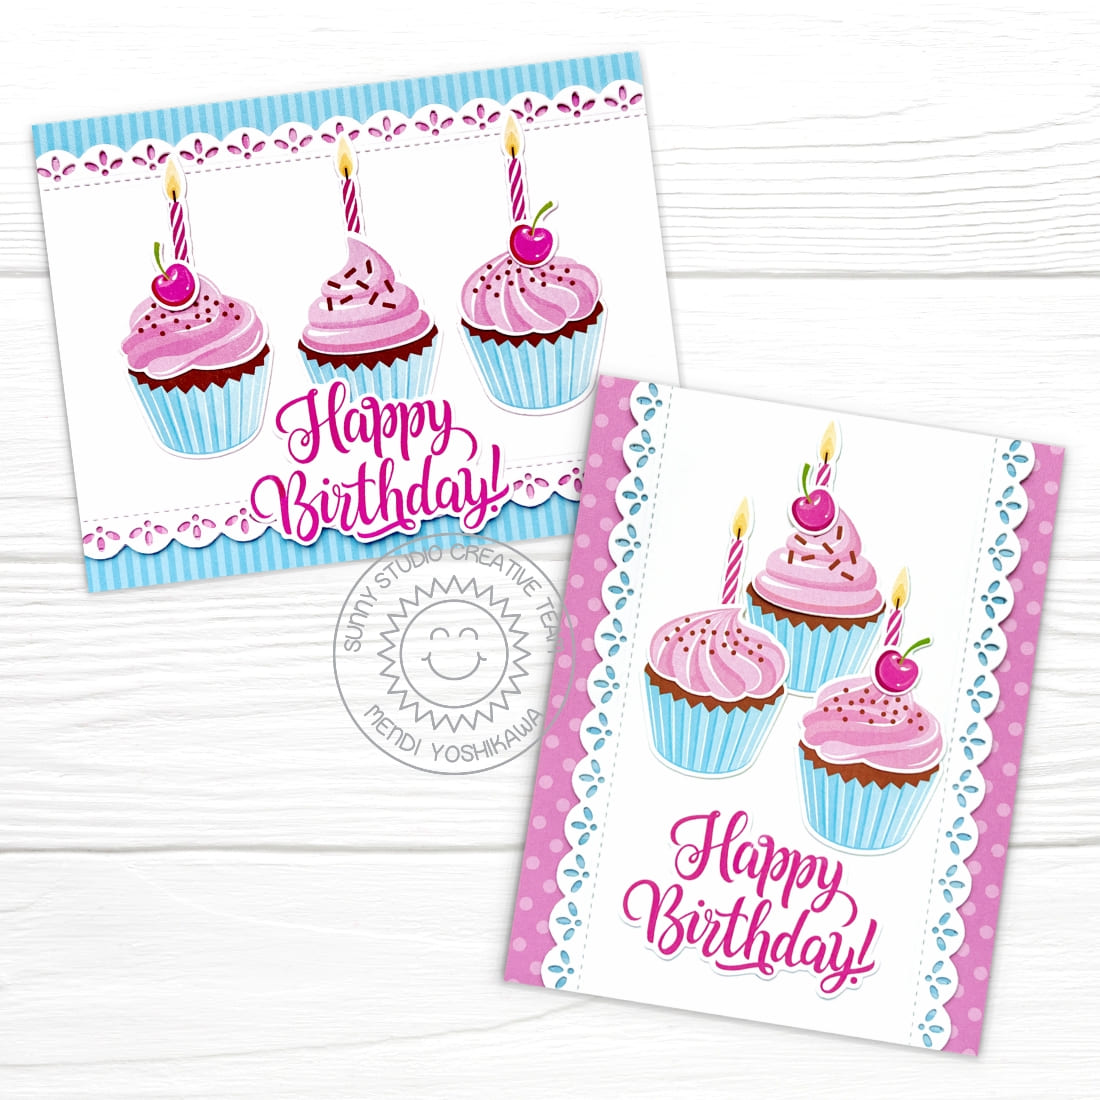 Sunny Studio Stamps Pink & Pale Blue Cupcakes Scalloped Birthday Card (using Ribbon & Lace Border Metal Cutting Dies)